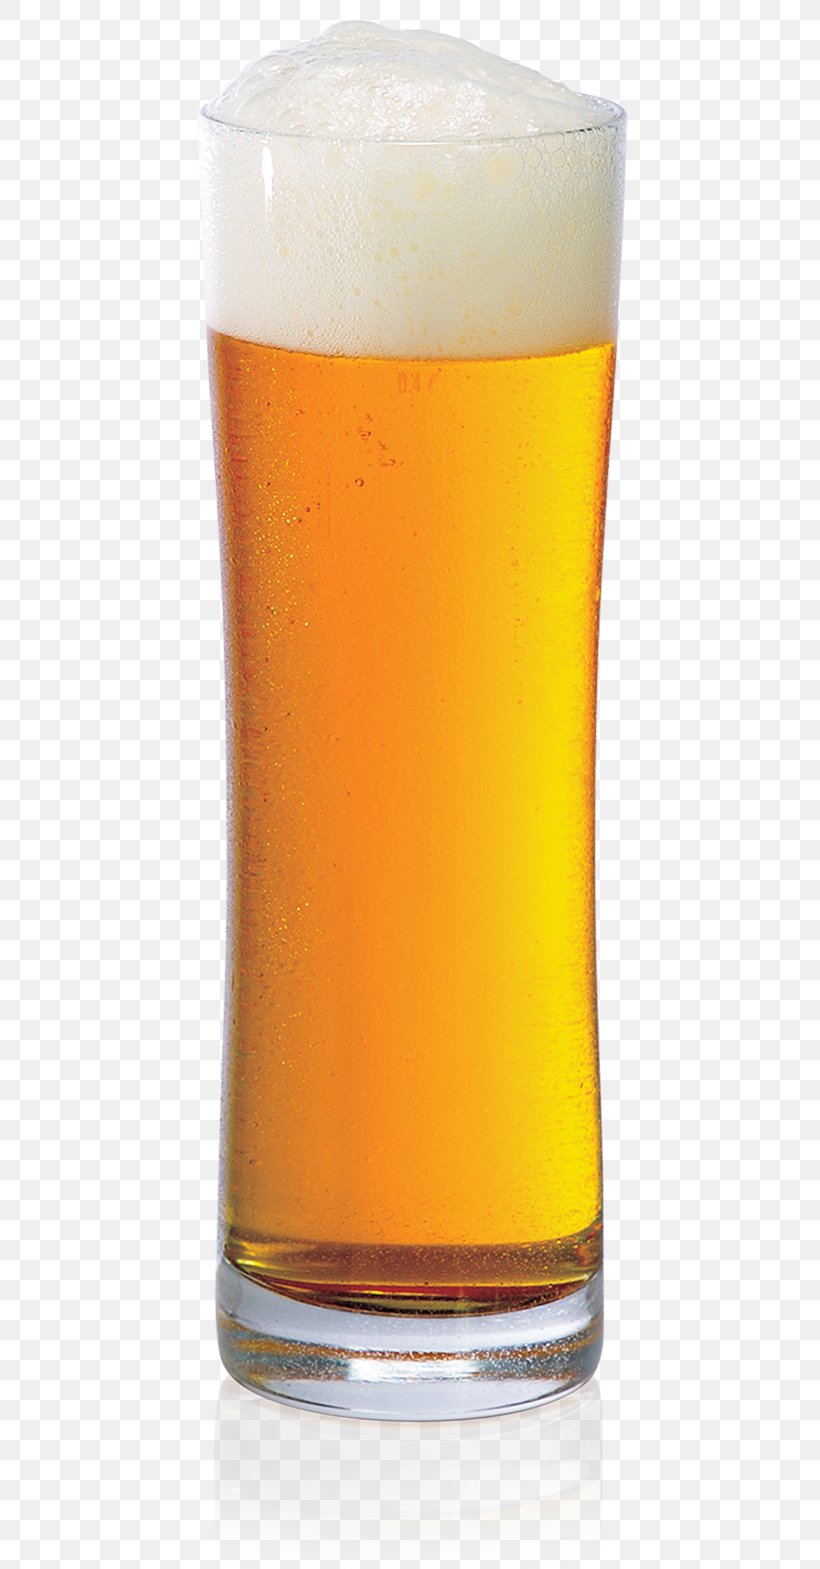 Beer Cocktail Pint Glass Wheat Beer Imperial Pint, PNG, 472x1569px, Beer Cocktail, Beer, Beer Glass, Cocktail, Drink Download Free